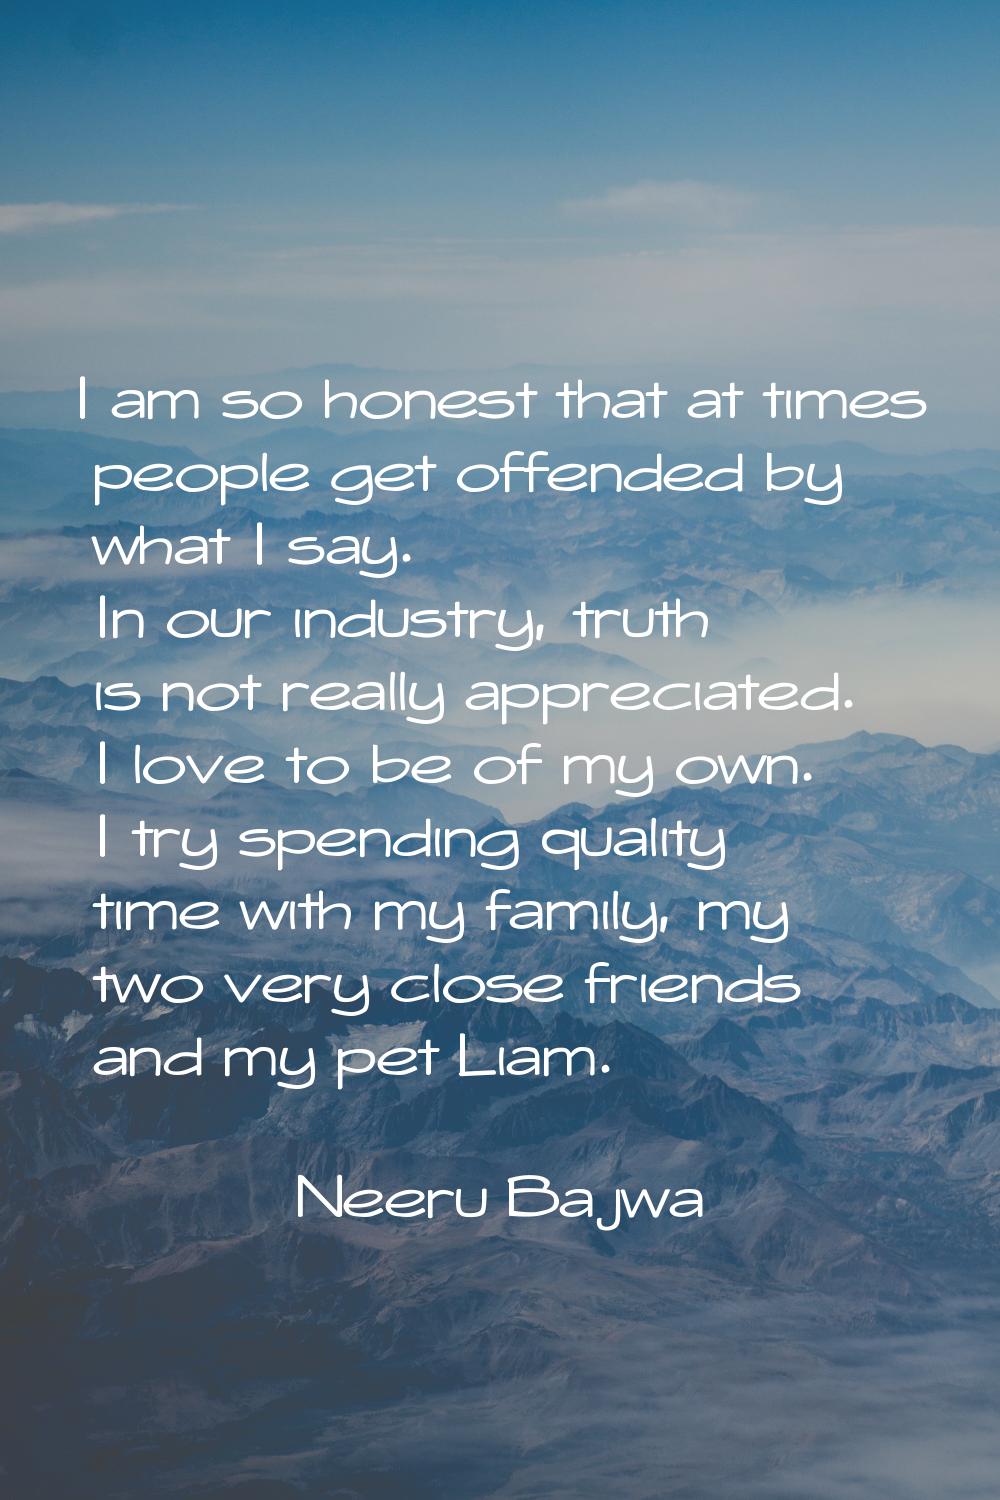 I am so honest that at times people get offended by what I say. In our industry, truth is not reall